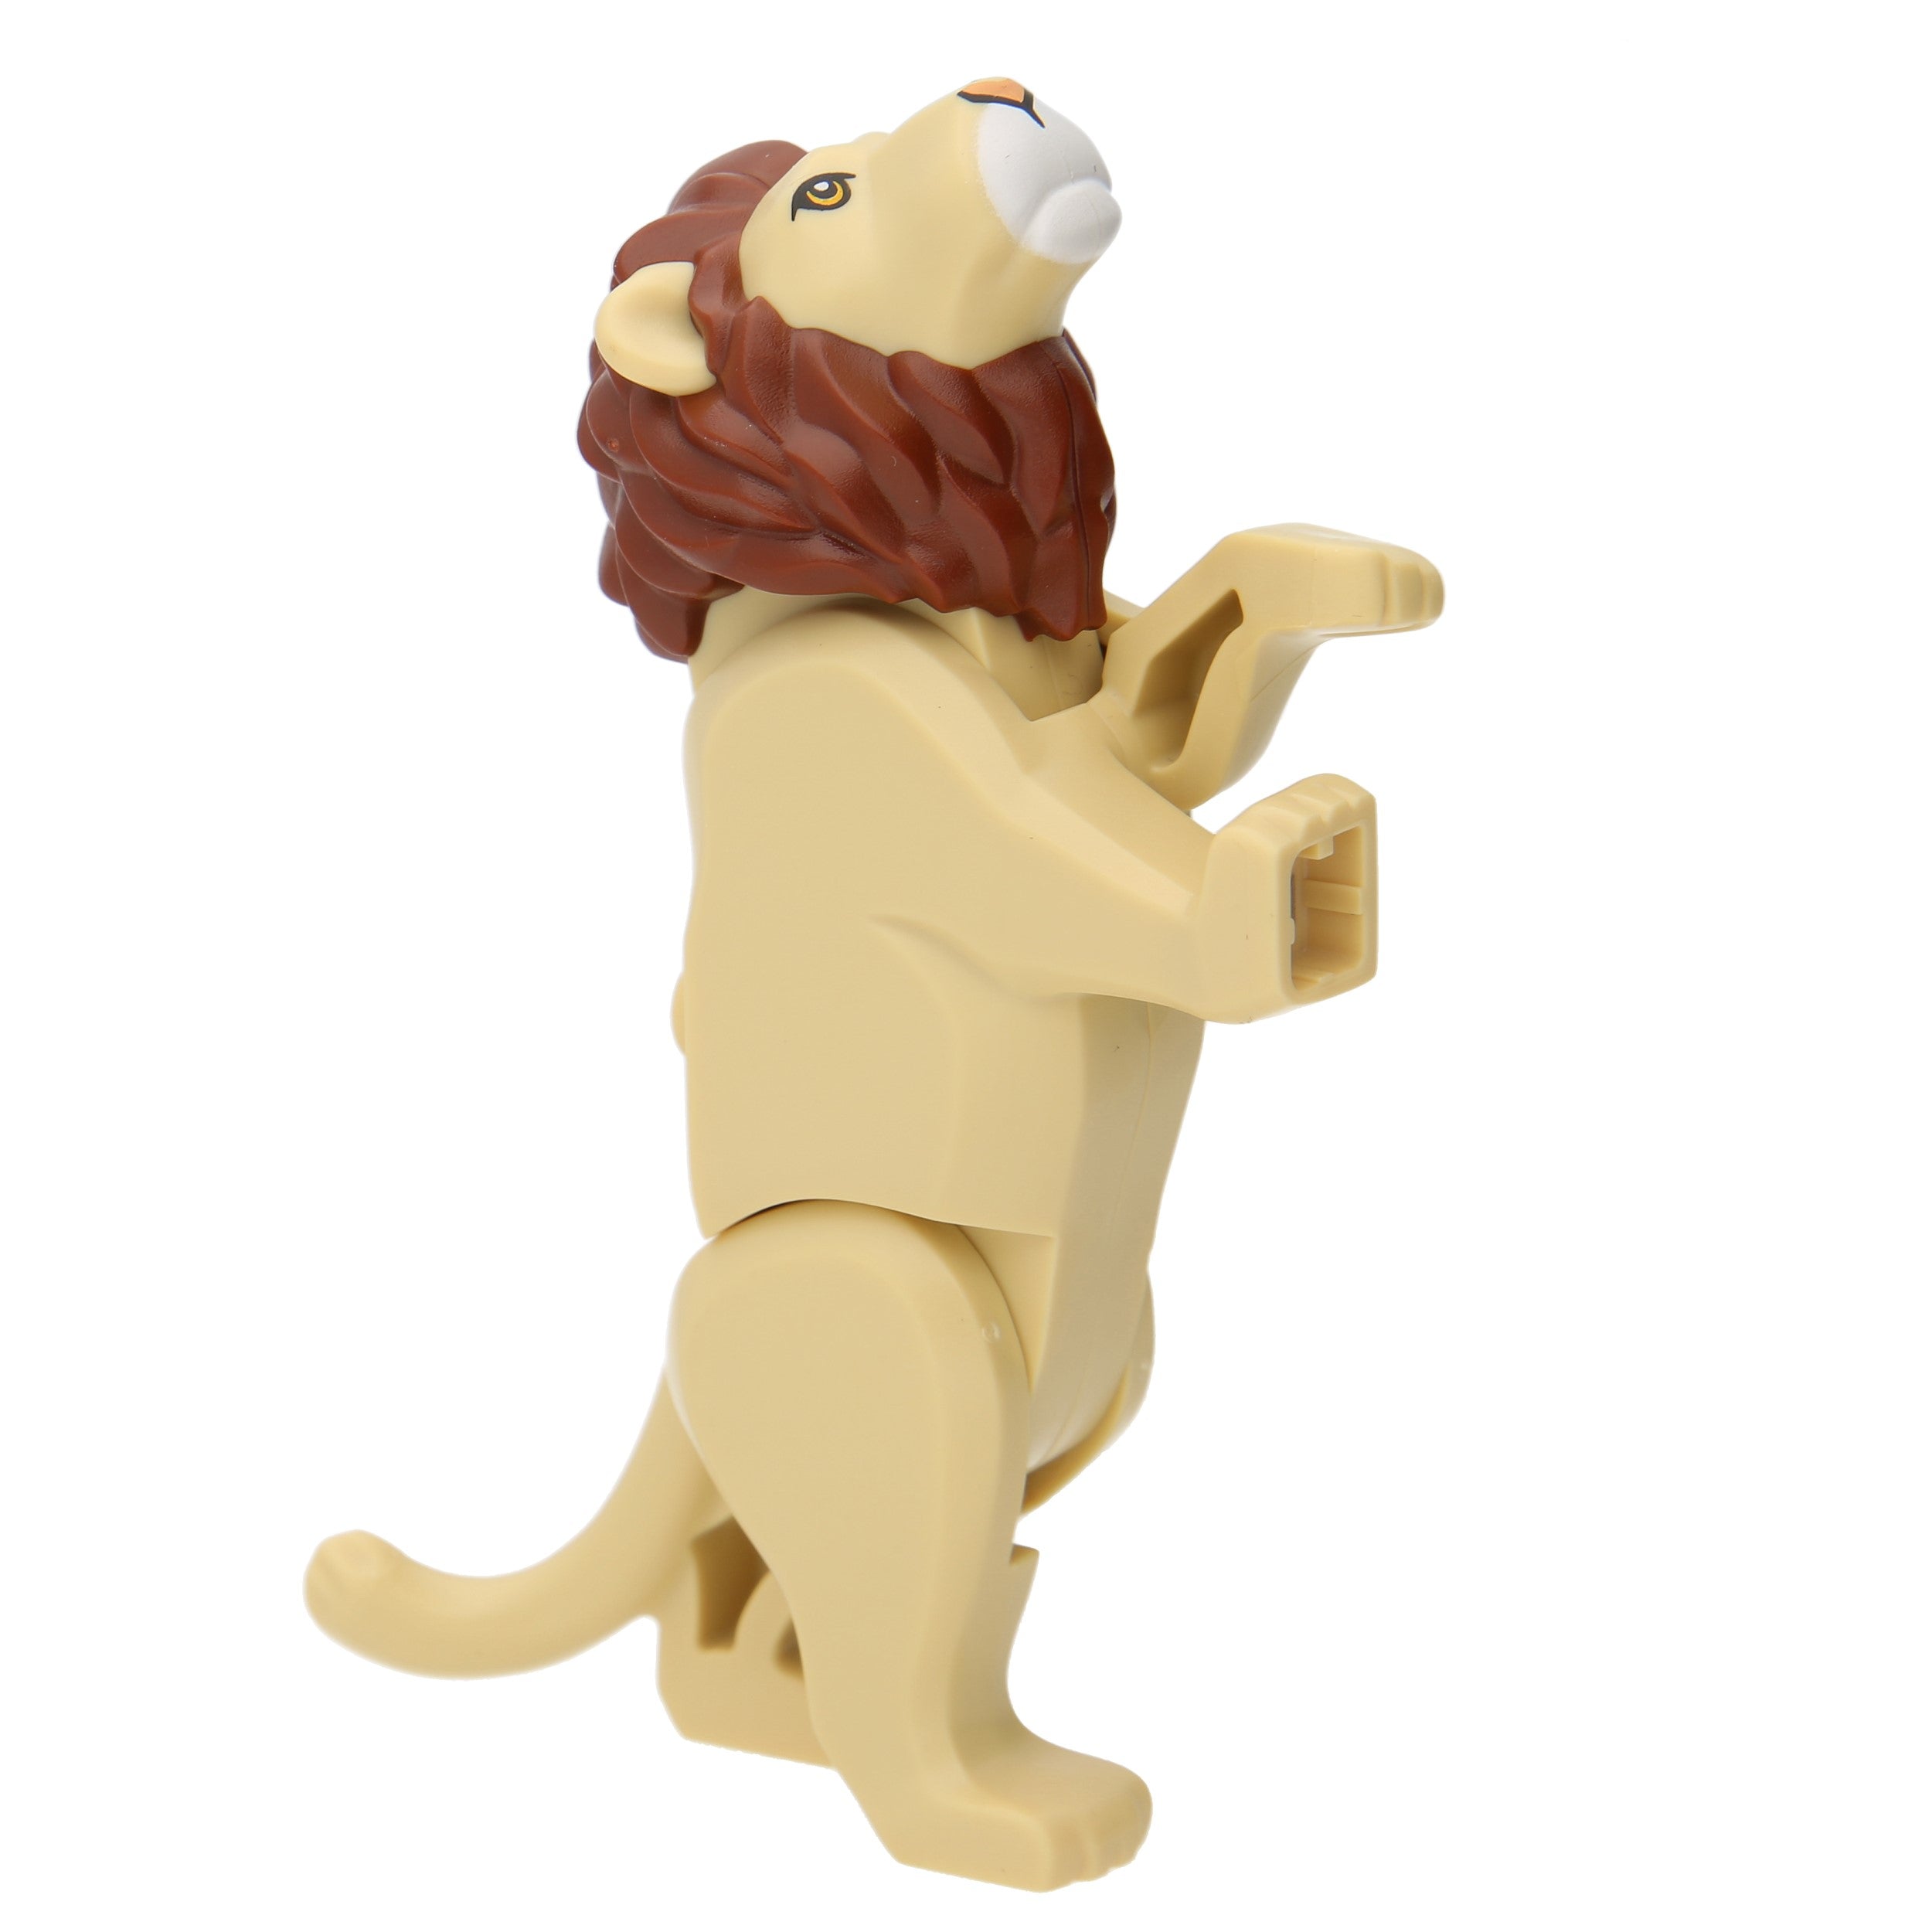 Lego cats - lion with red -brown mane (beige)